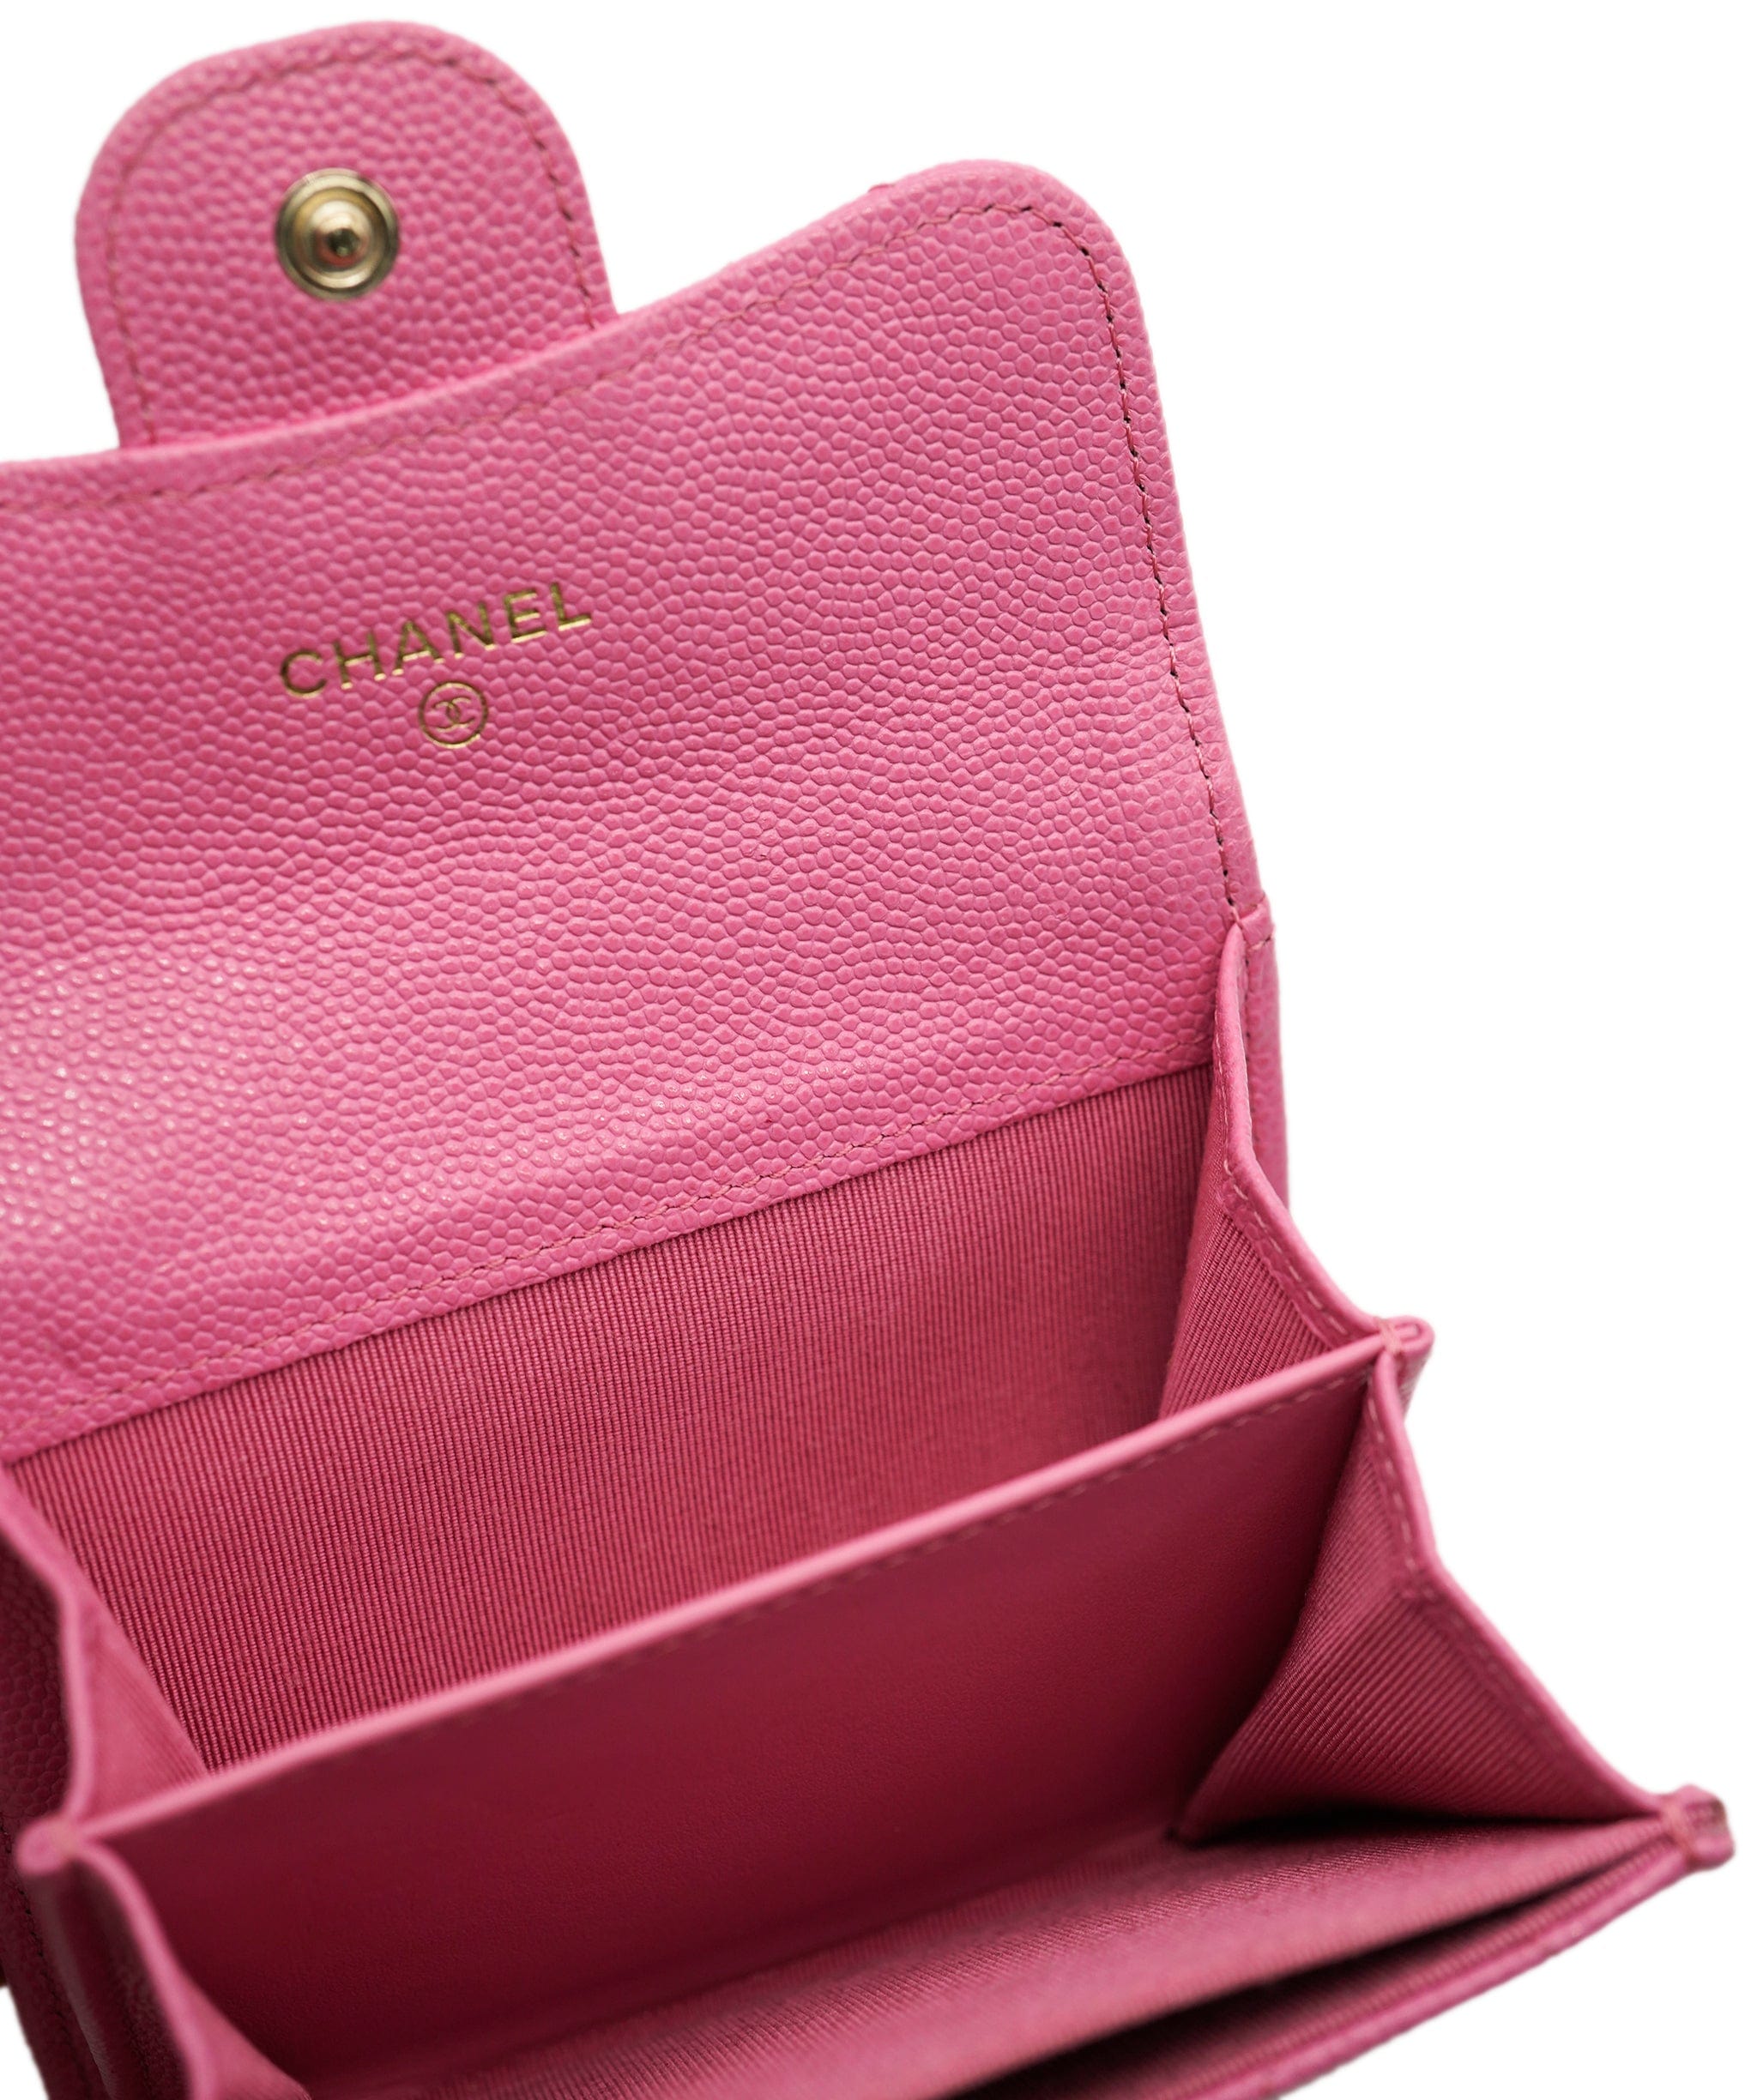 Chanel Chanel Pink Quilted Caviar Card Holder With Chain ABC0755